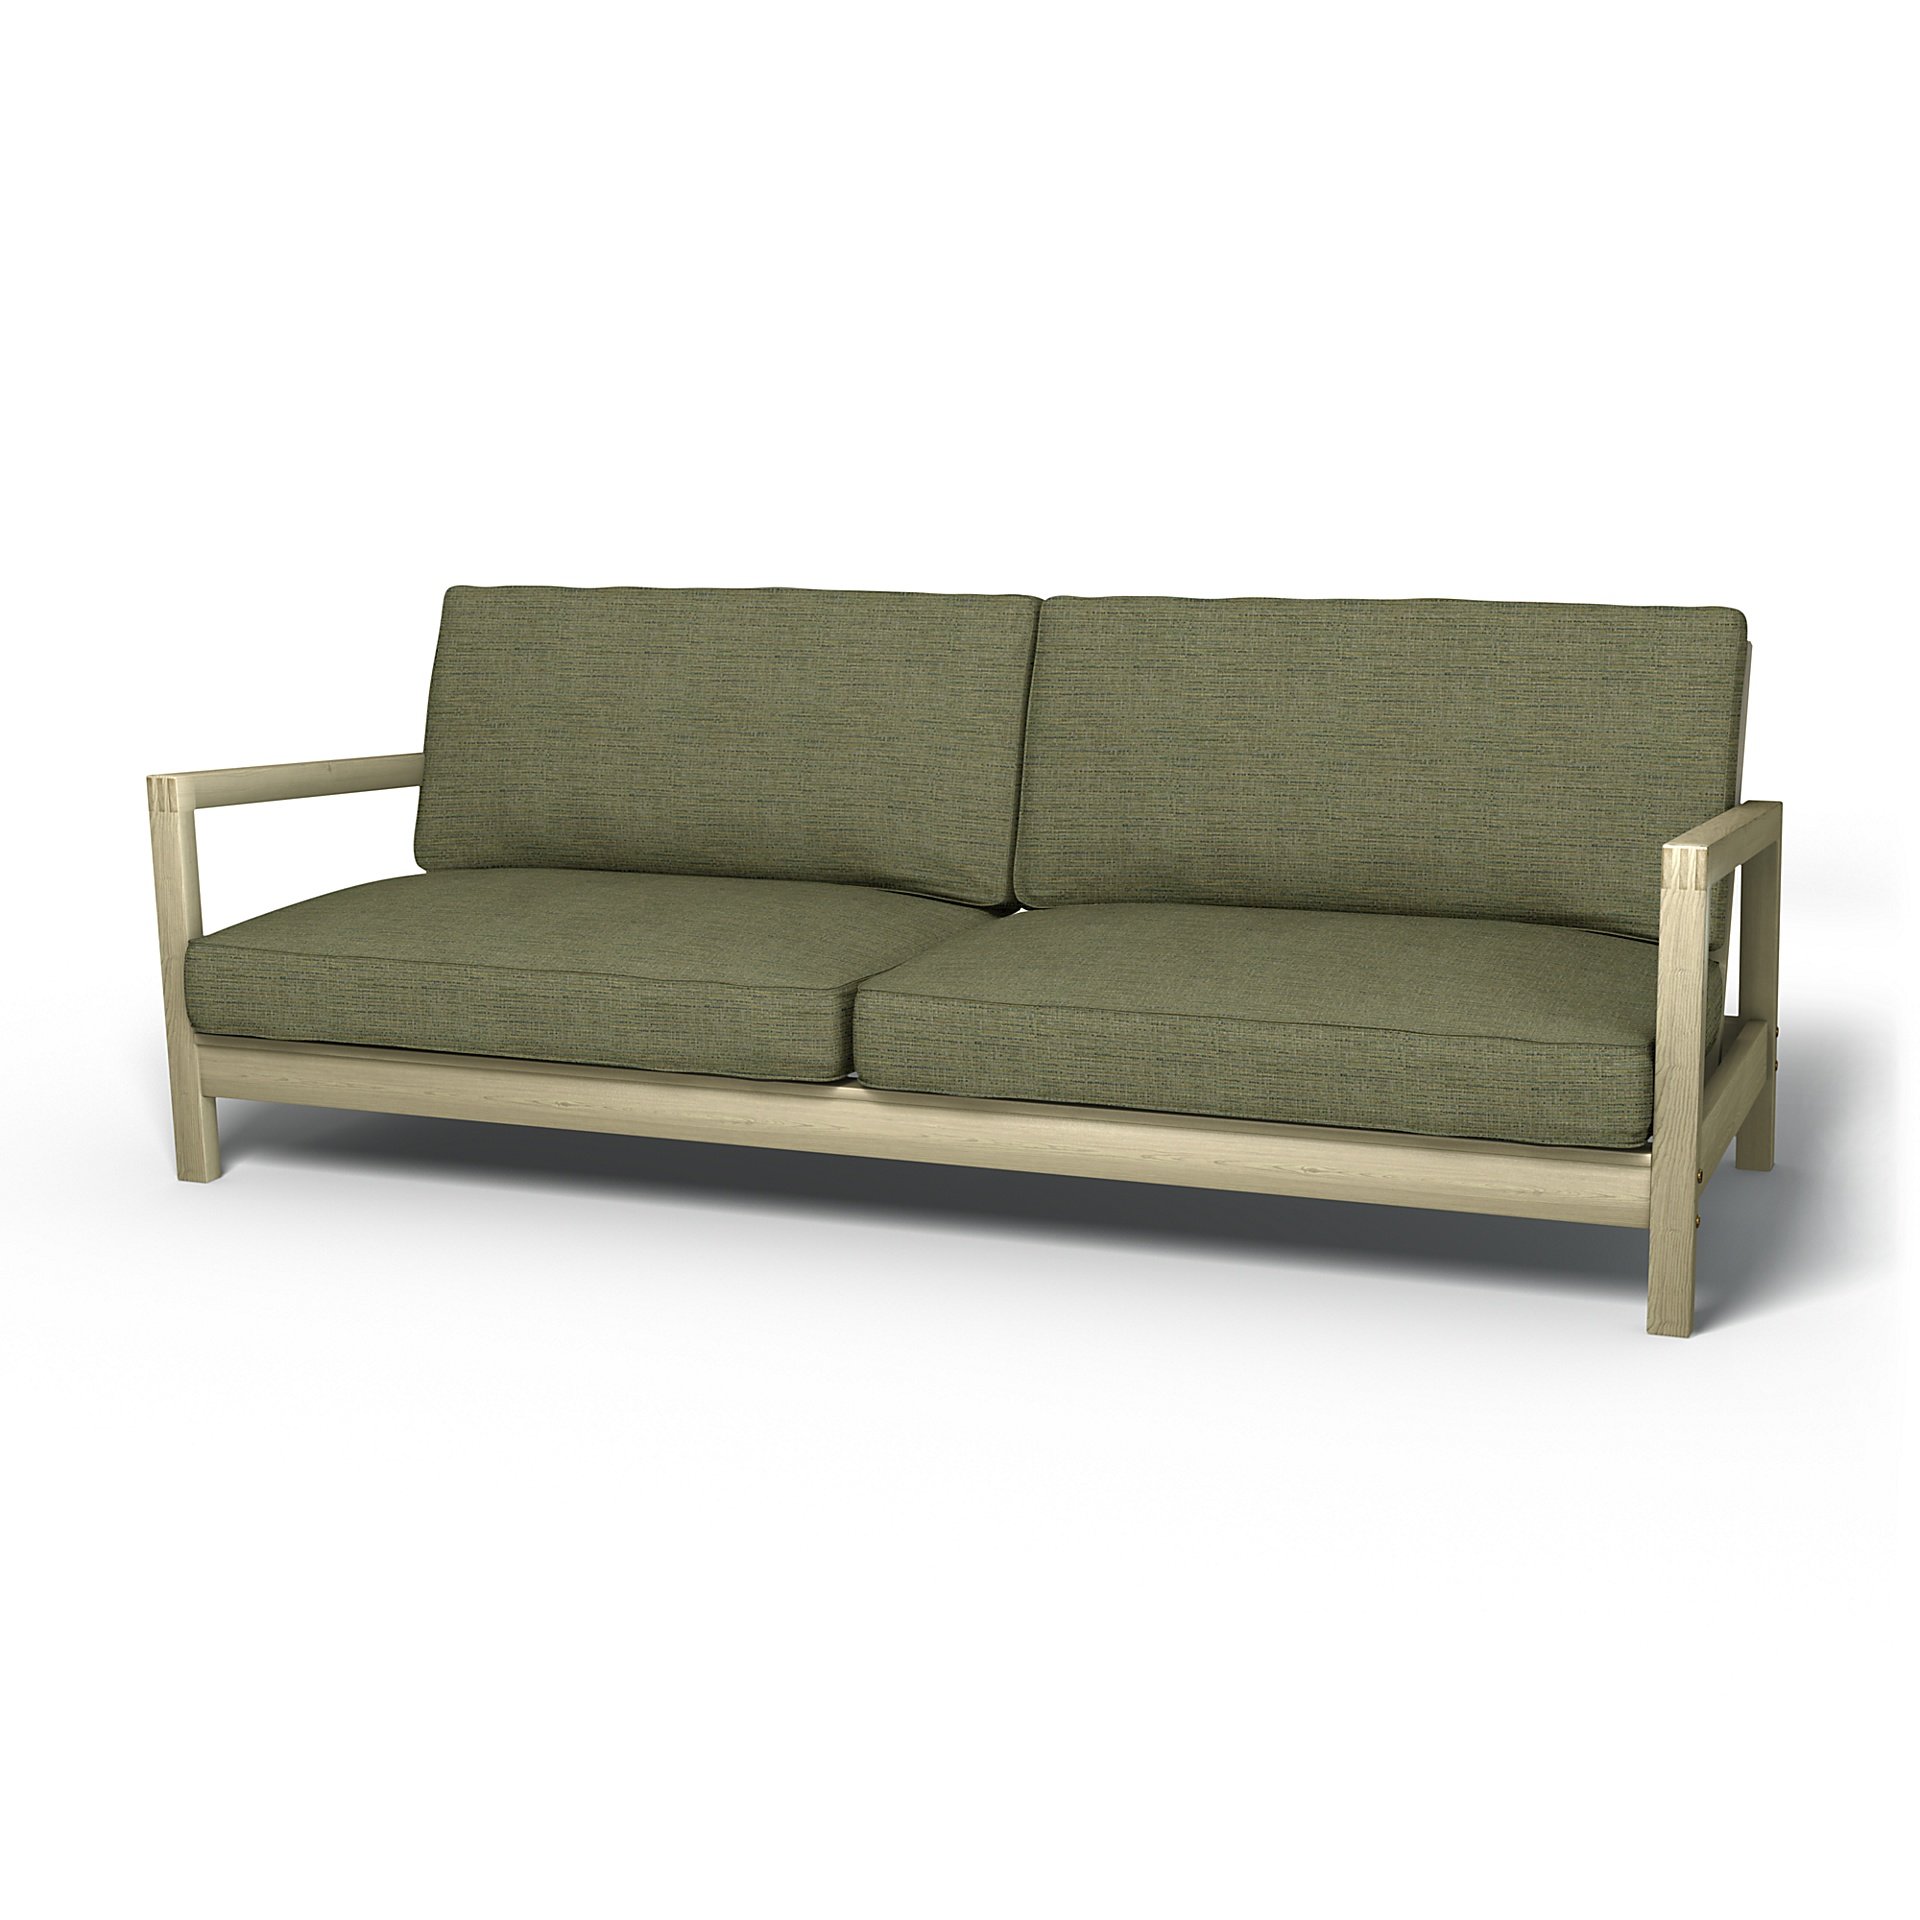 IKEA - Lillberg Sofa Bed Cover, Meadow Green, Boucle & Texture - Bemz